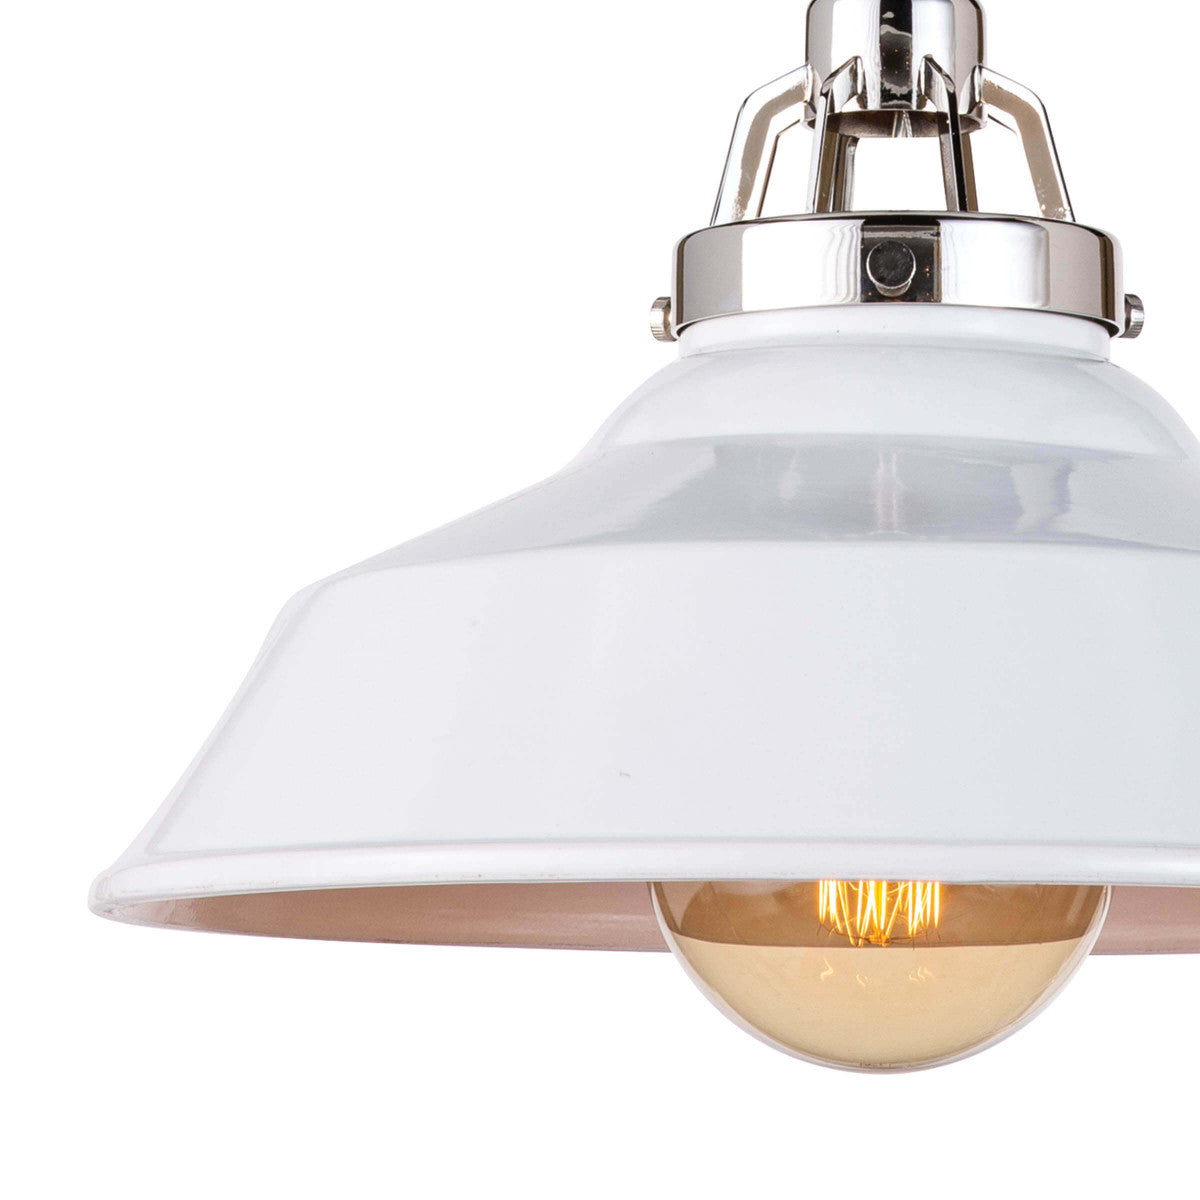 The polished nickel hardware and ceramic shade of this Maine White Ceramic Pendant instills a contemporary edge. It brings an antique charm to any modern-day kitchen or dining room  Size: 16"w x 16"d x 15"h Material: Ceramic